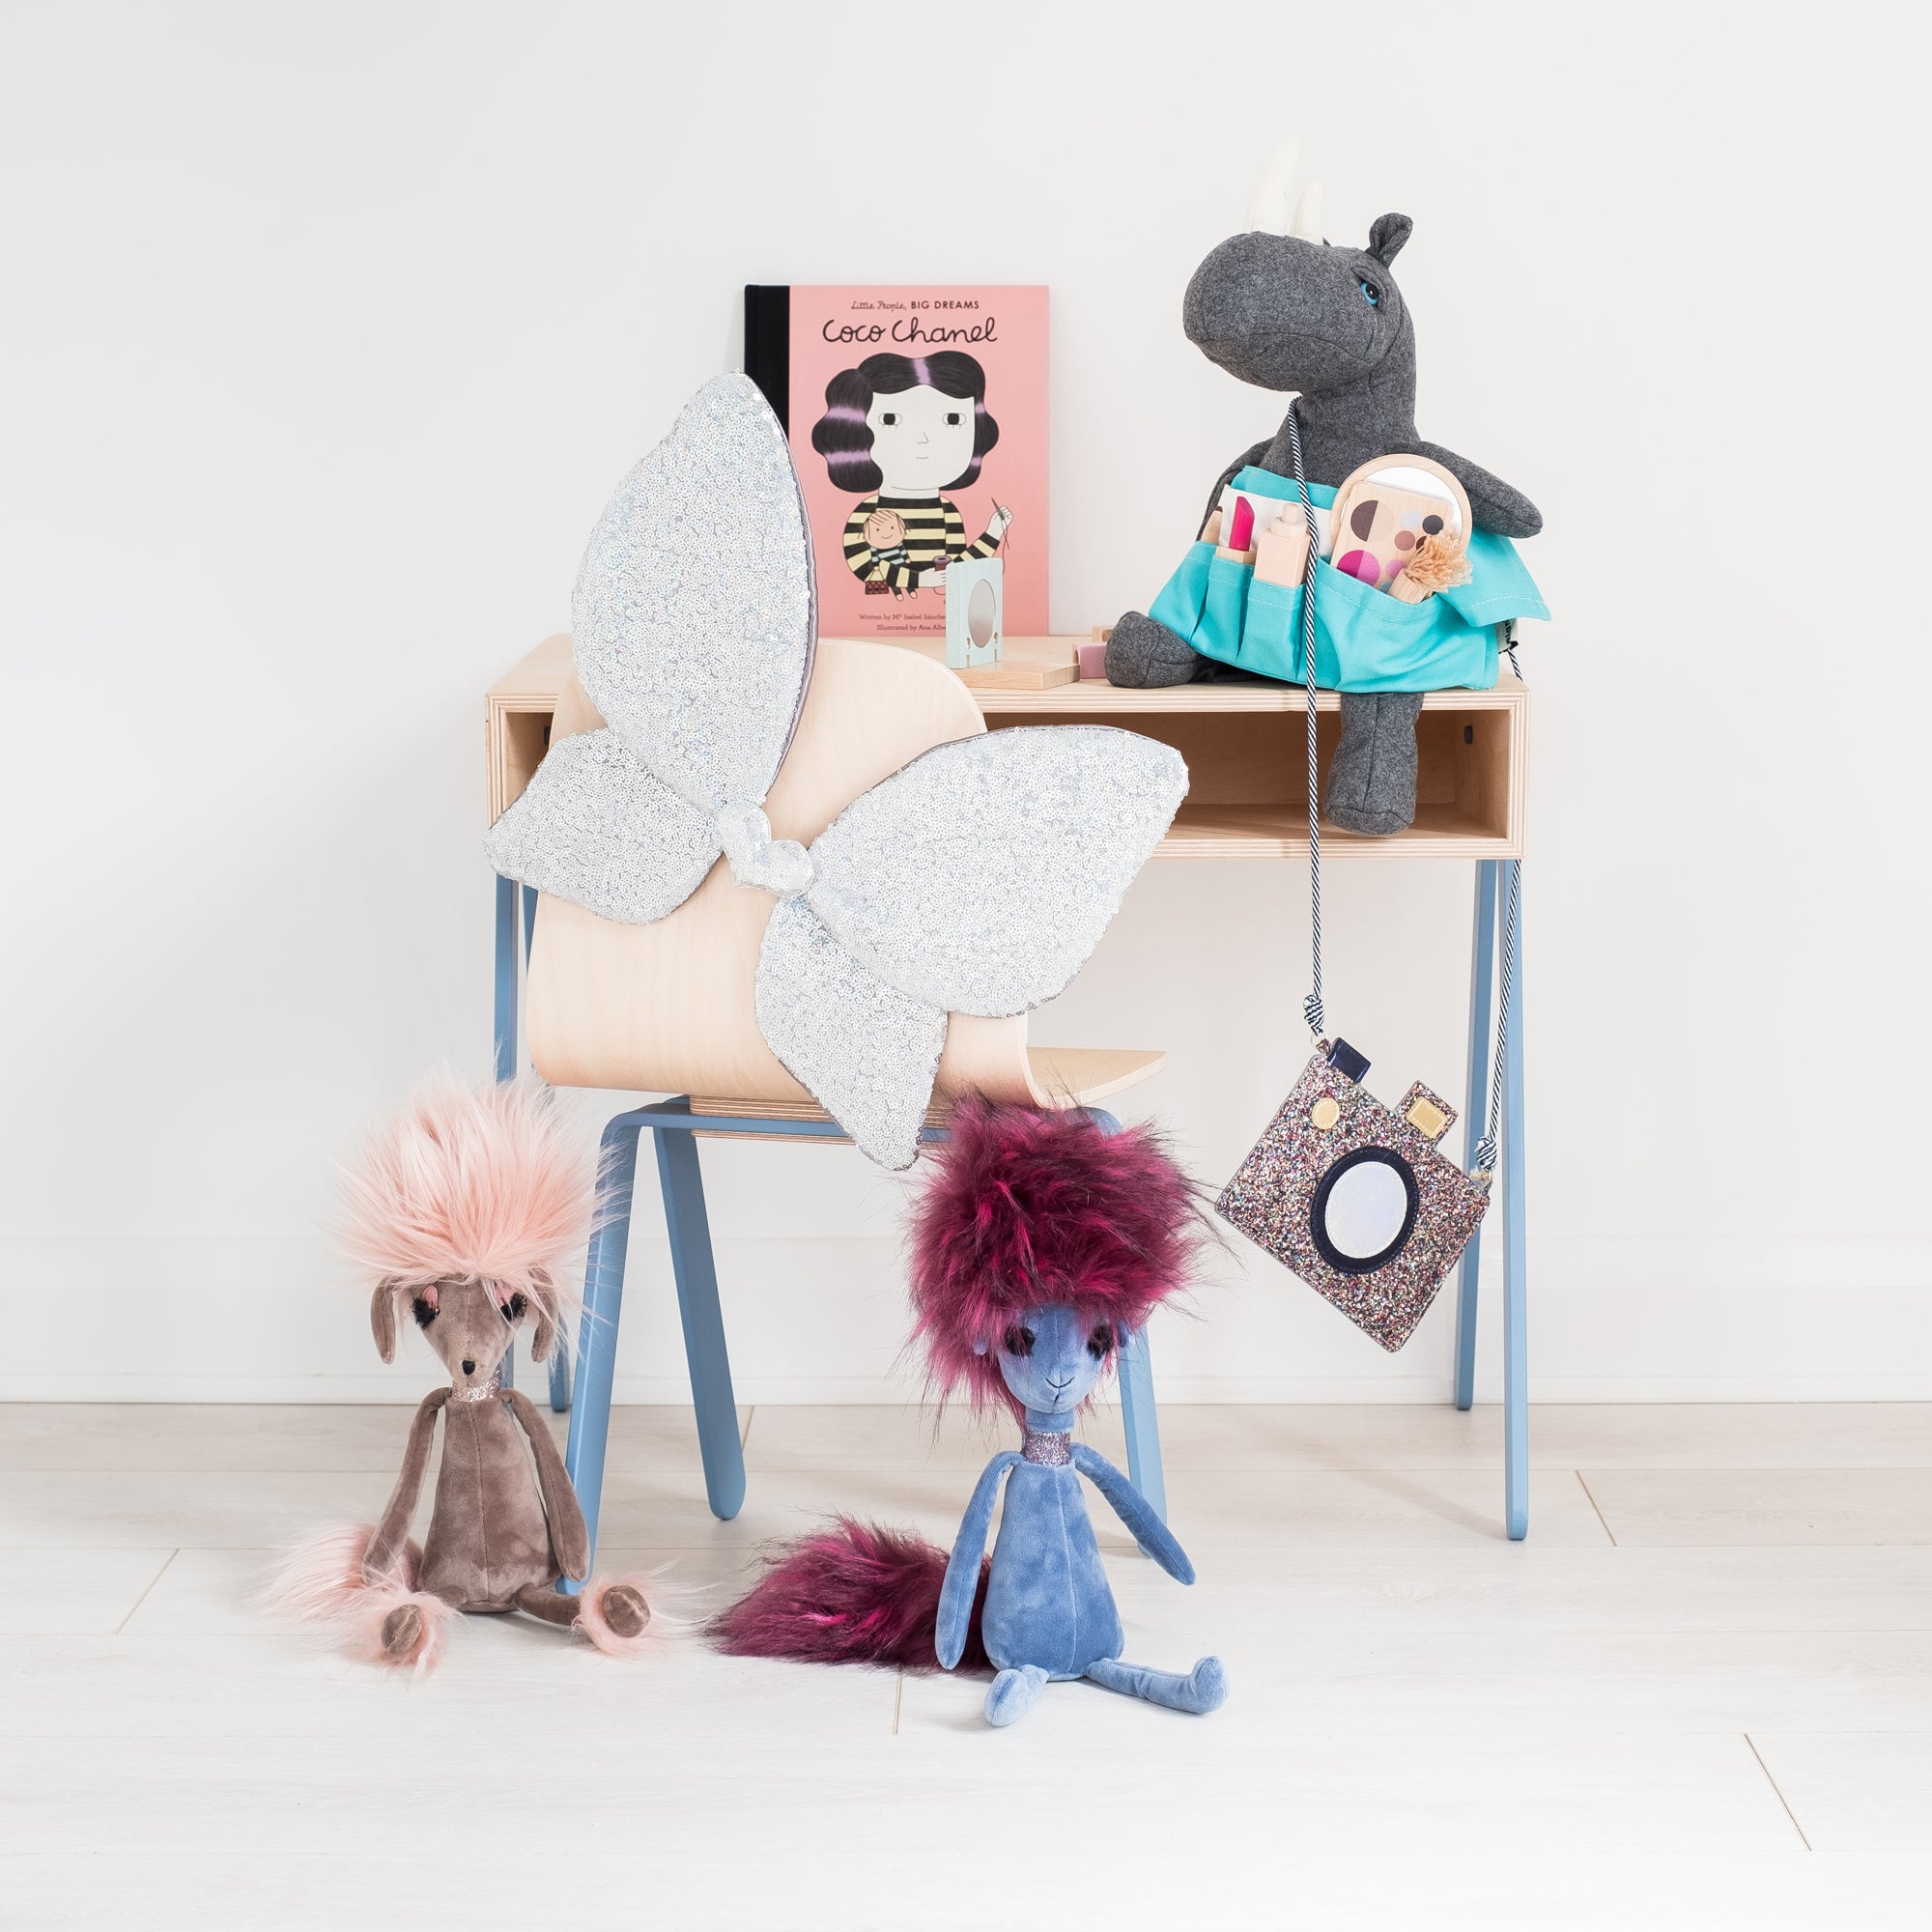 Children's Toys and Accessories, available at Bobby Rabbit.